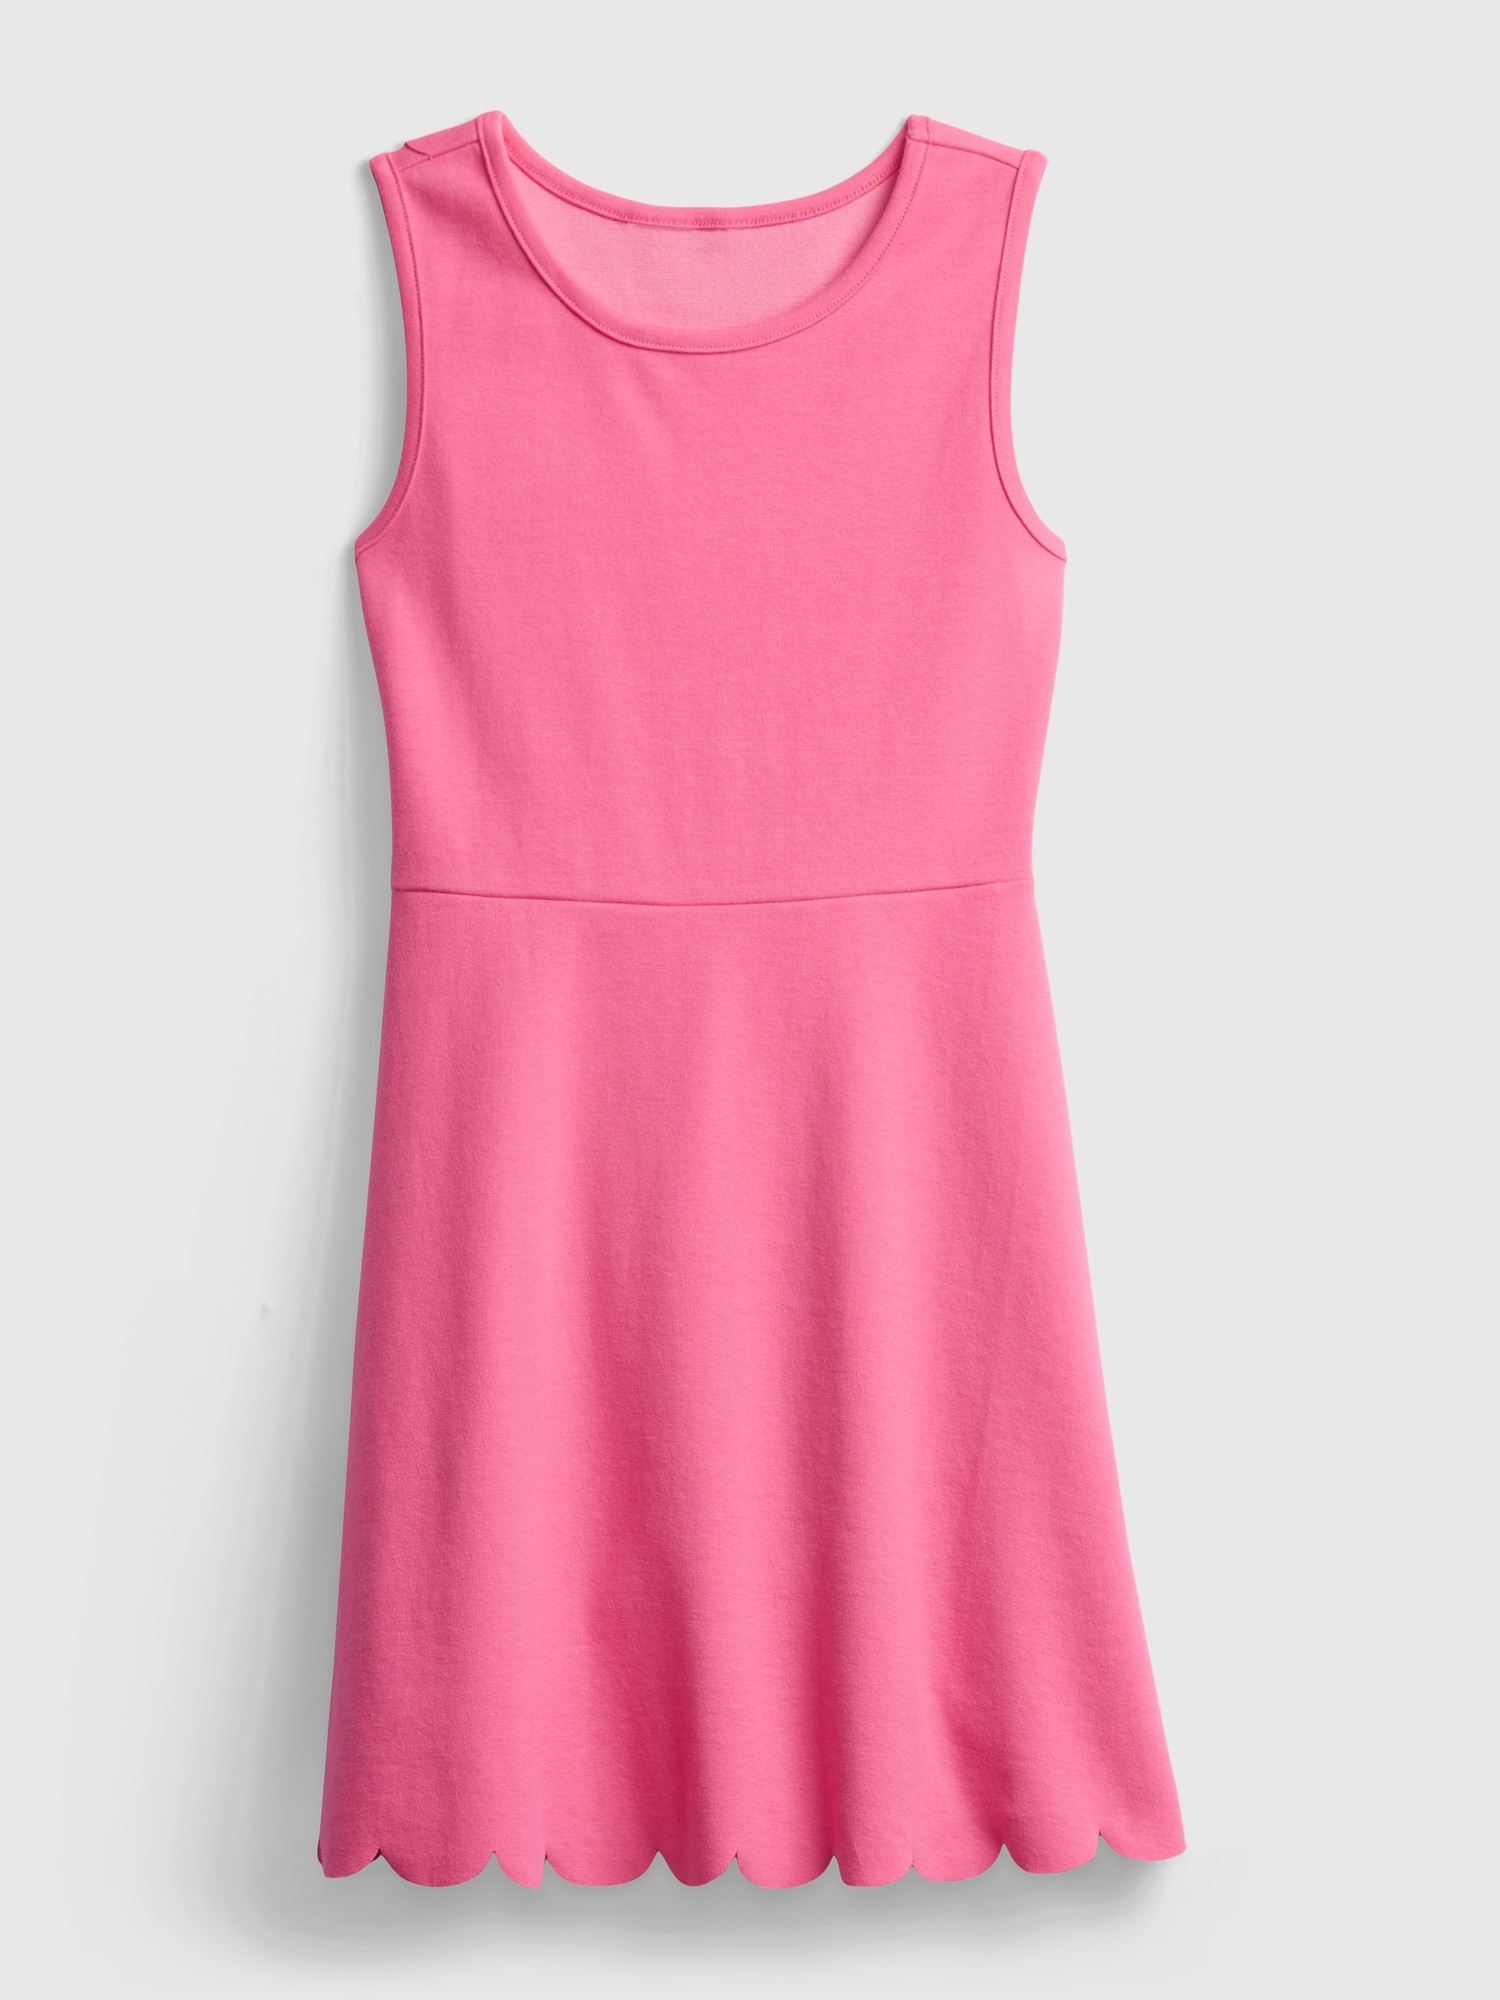 Kate Spade Pink Roset Fit and Flare Dress Review